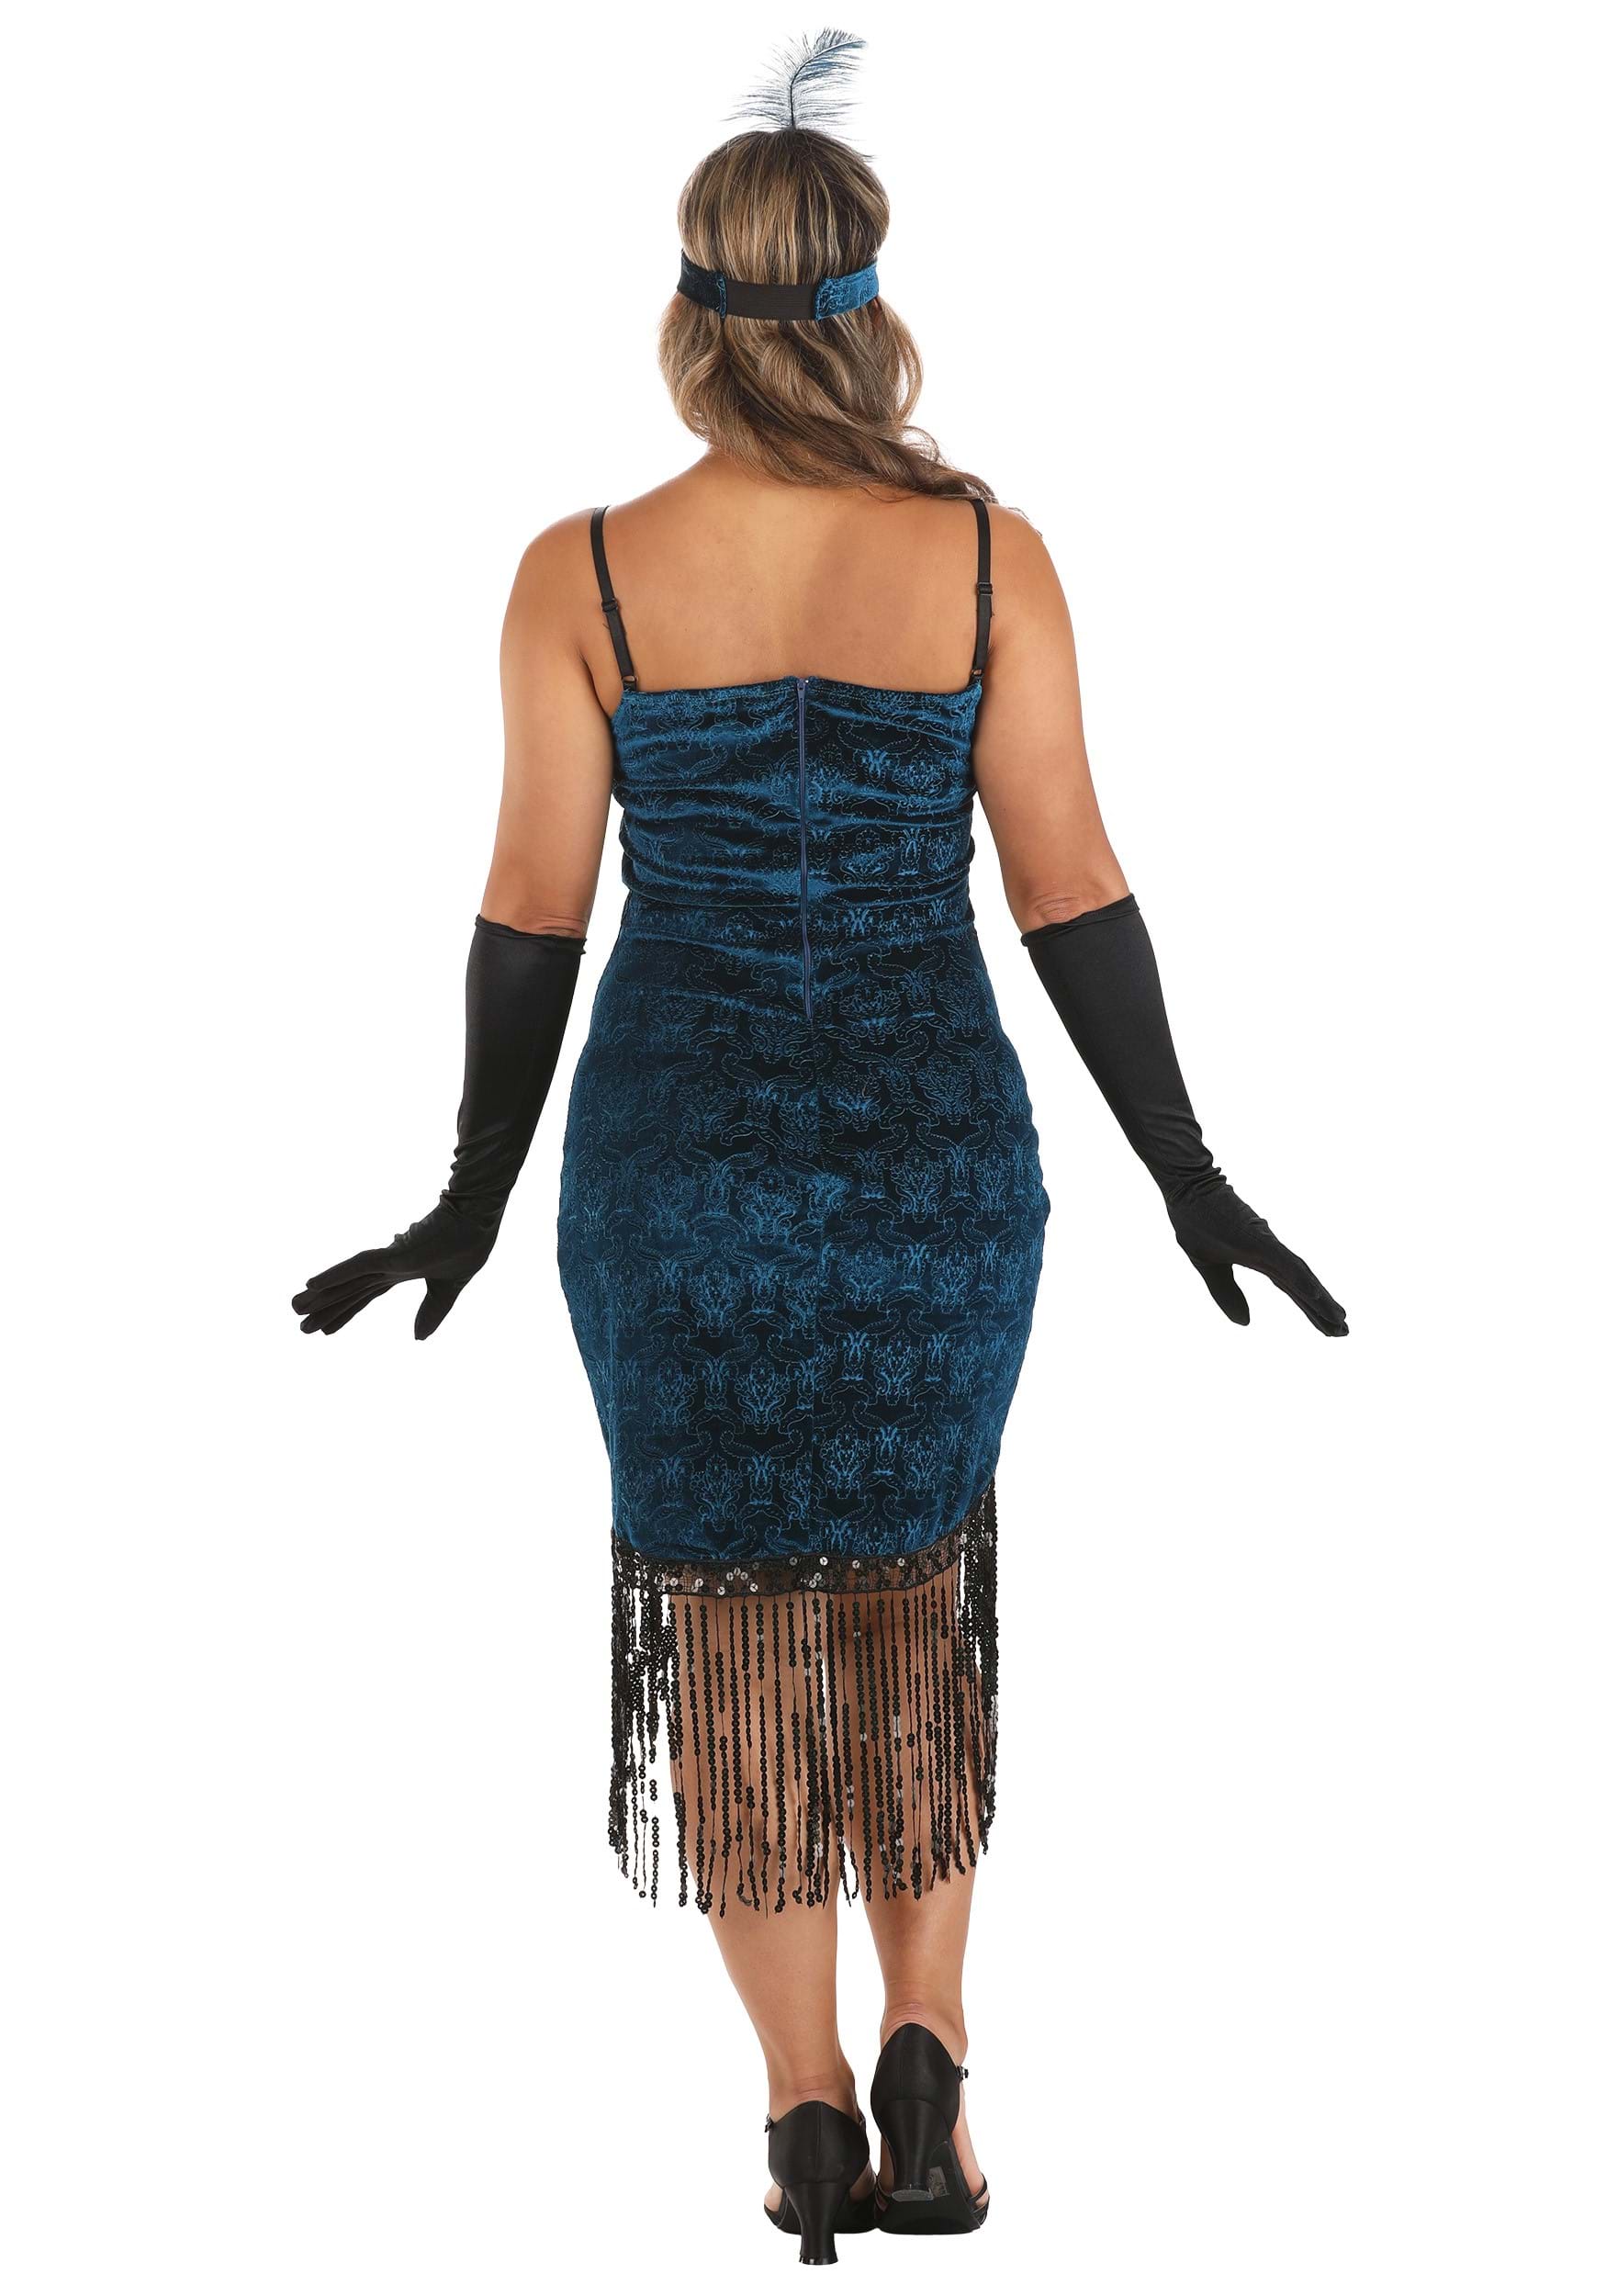 Women's Downtown Doll Costume , Adult Flapper Costumes